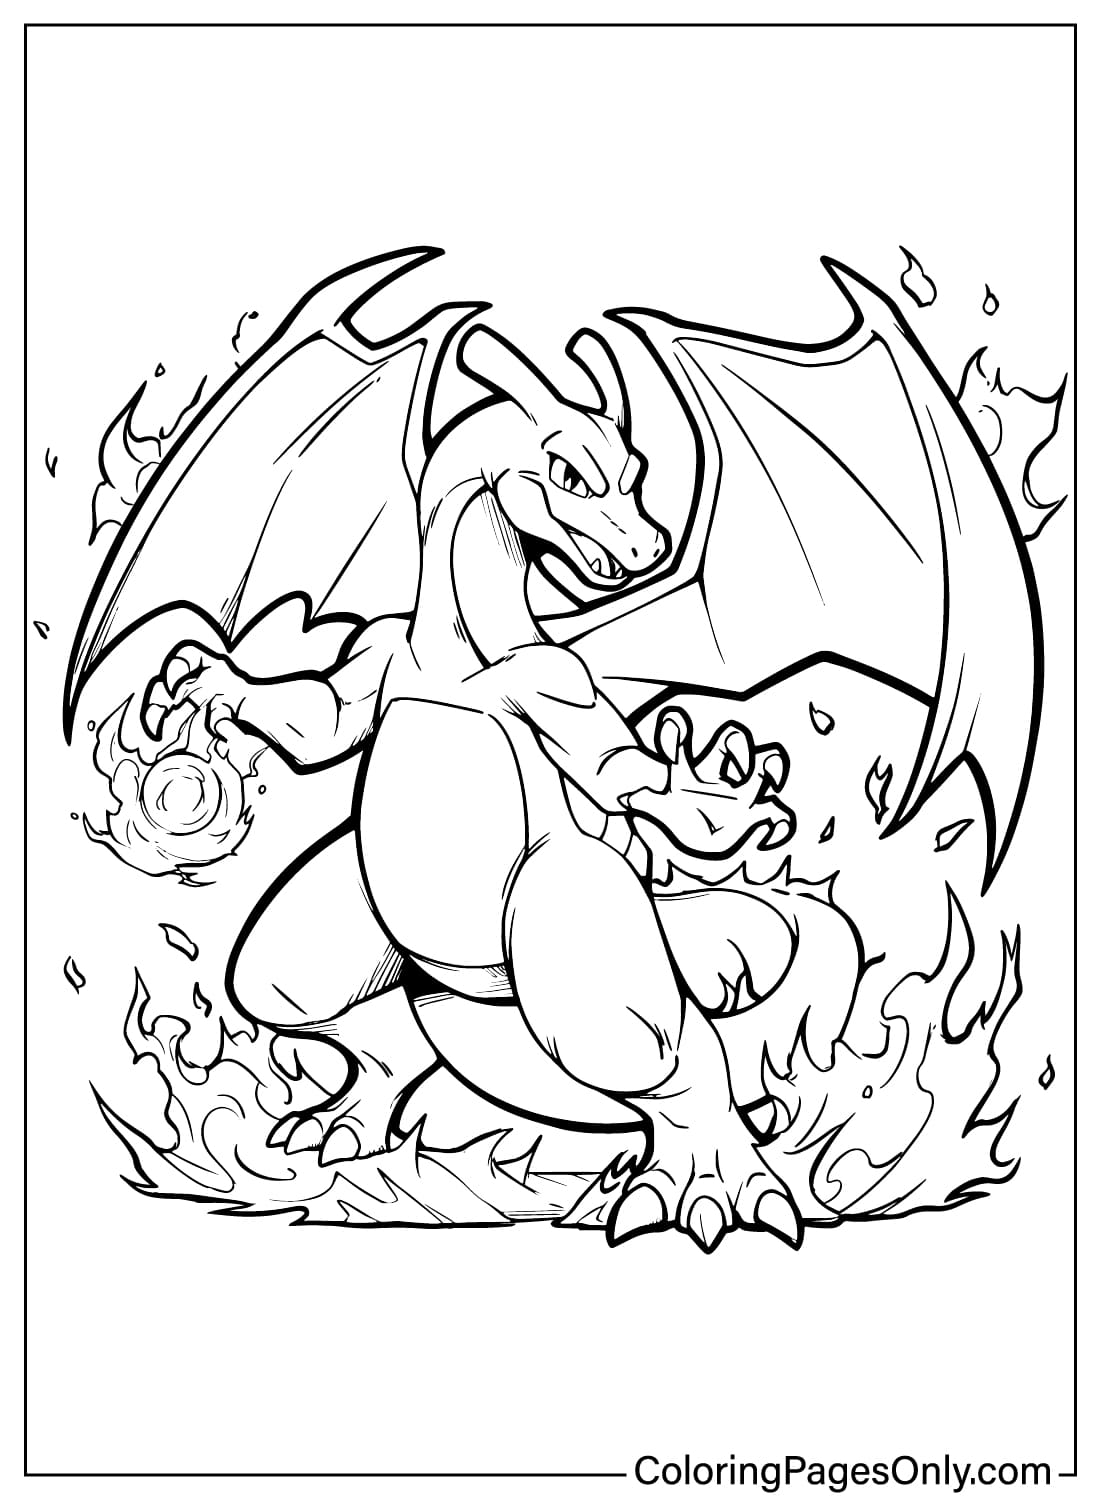 Charizard Coloring Page Free